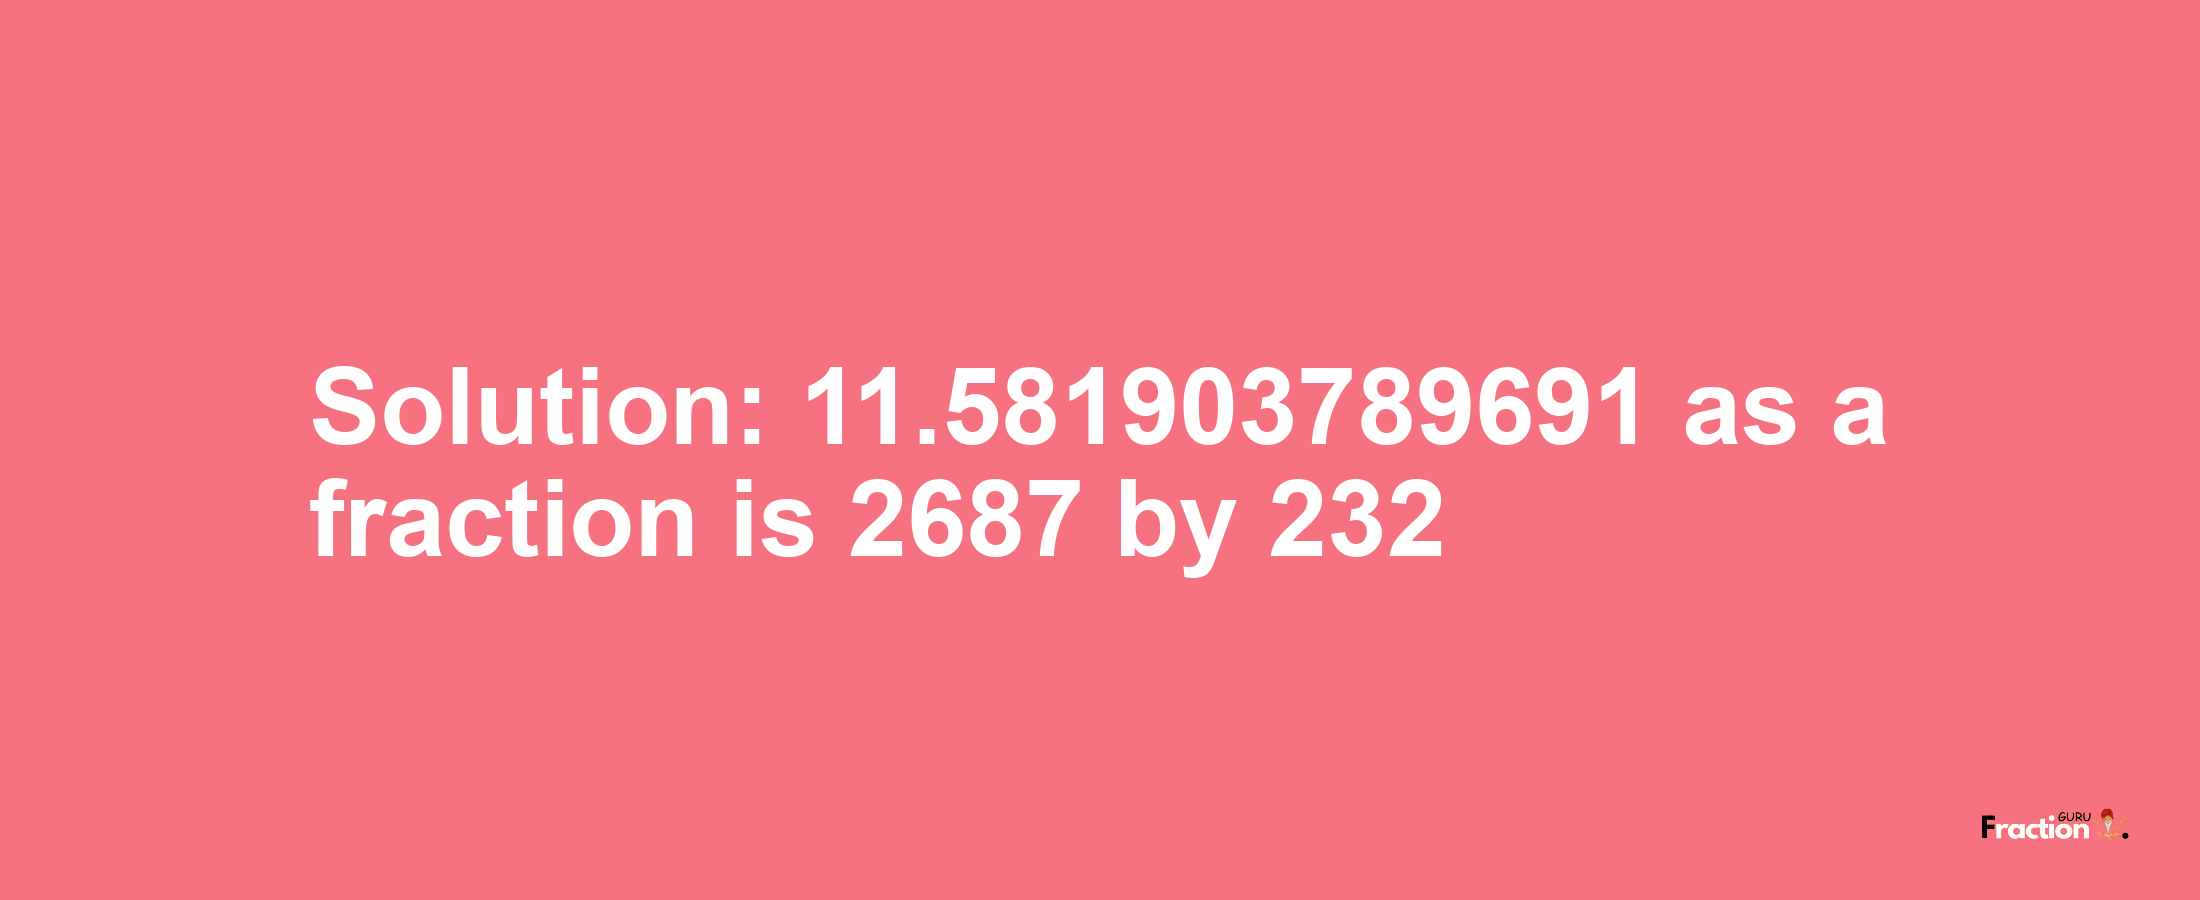 Solution:11.581903789691 as a fraction is 2687/232